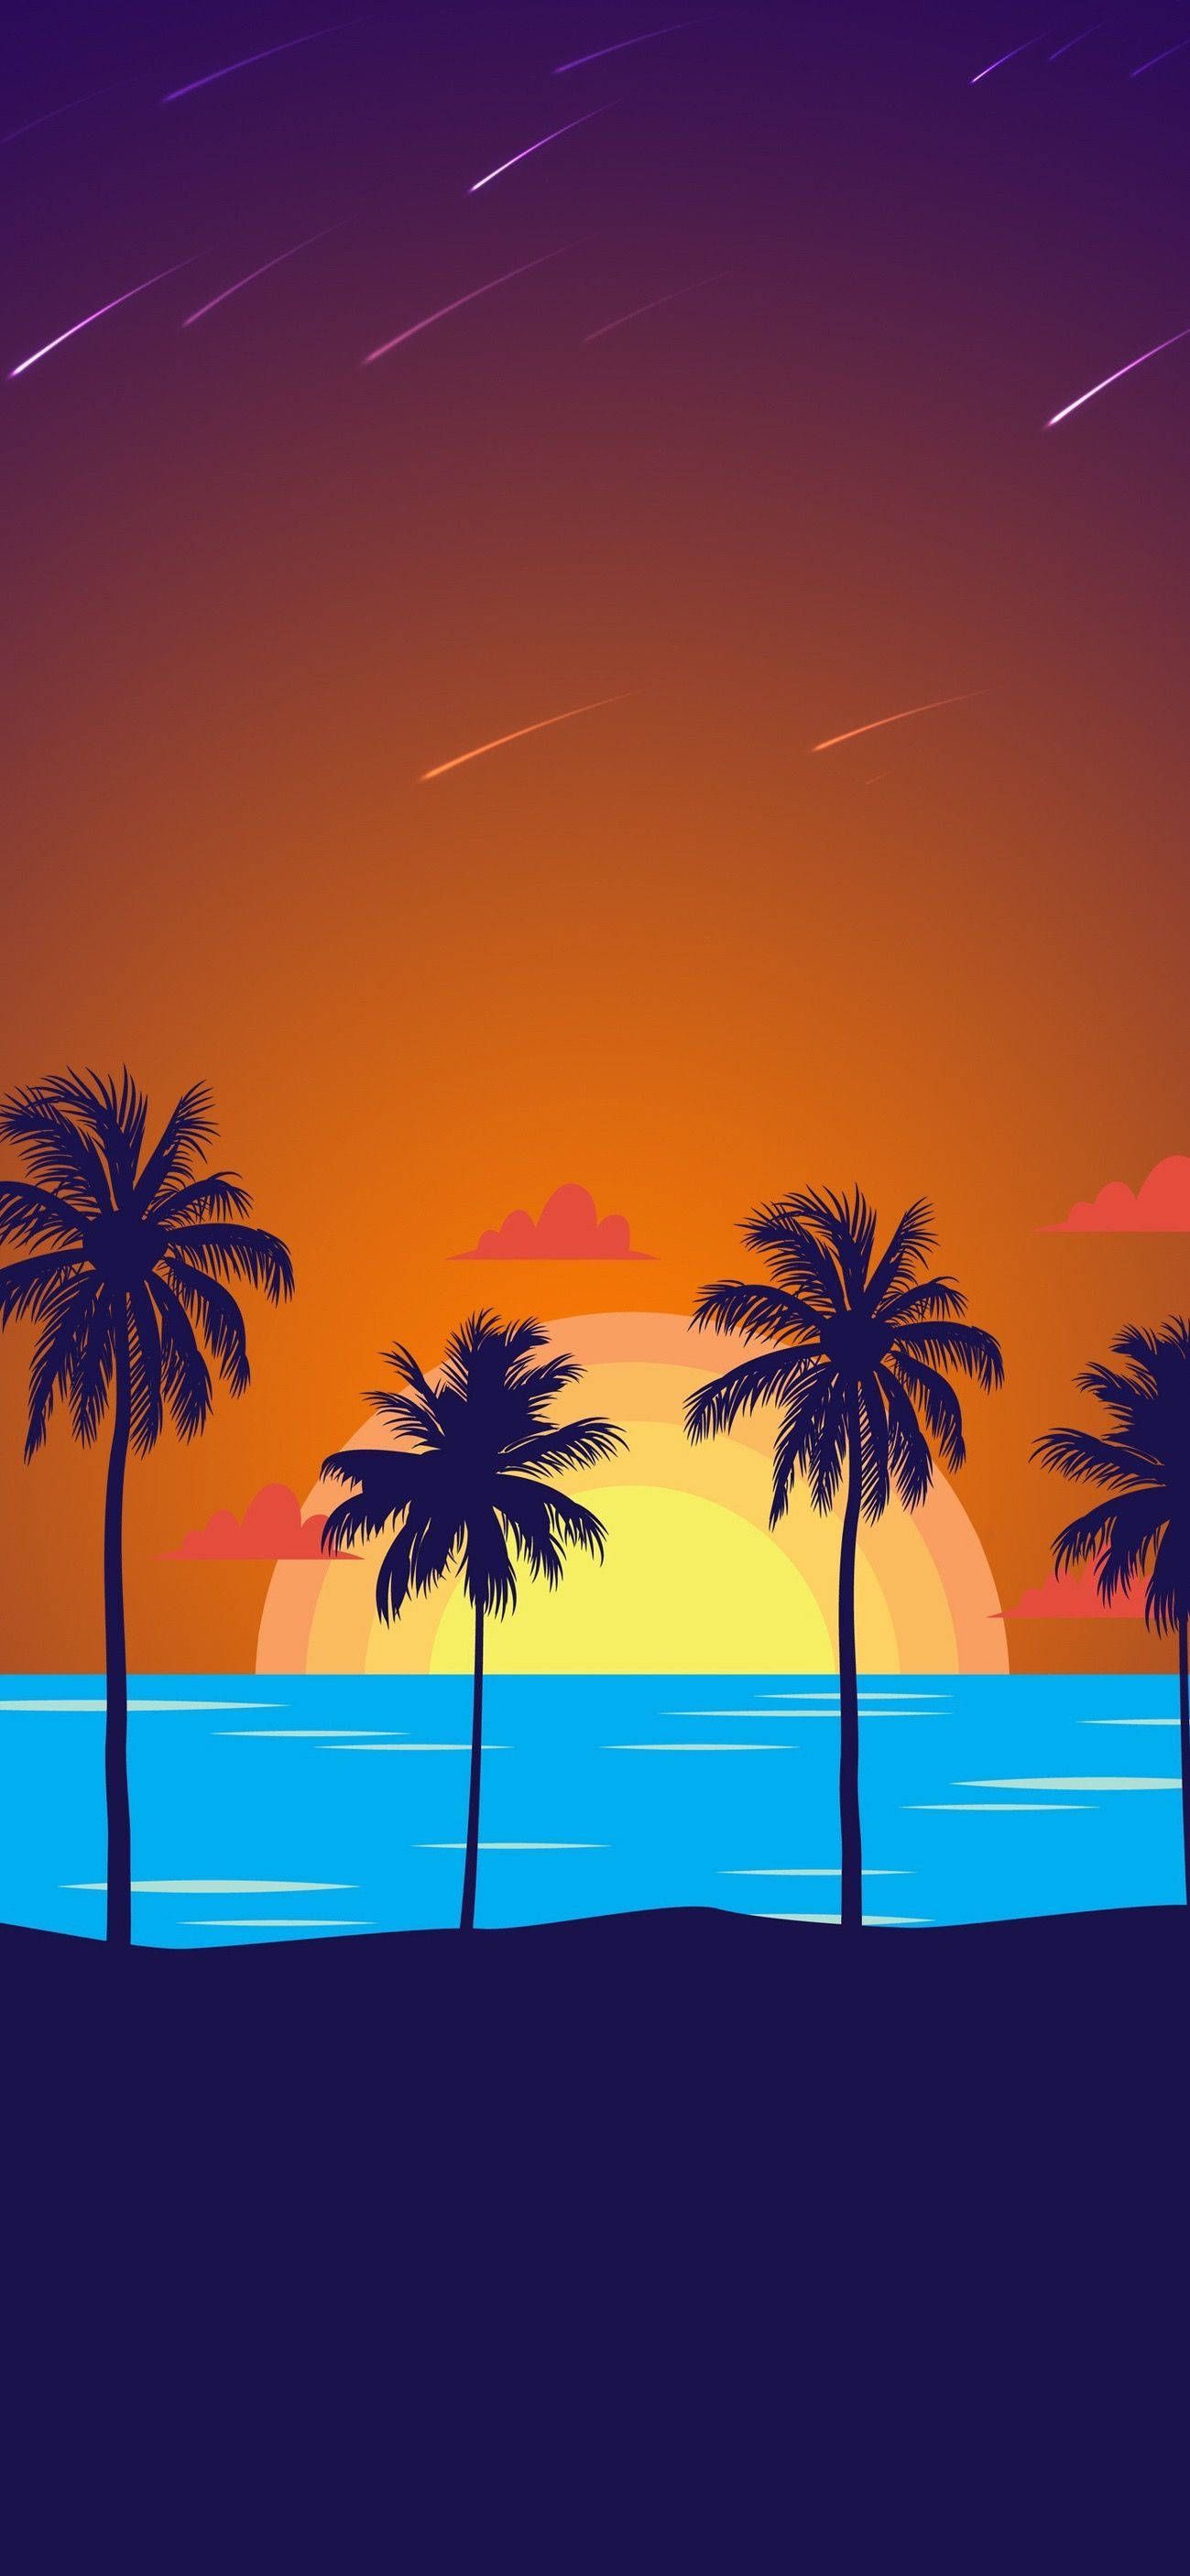 1440x2560 wallpaper of a sunset with palm trees on the beach - Tropical, clean